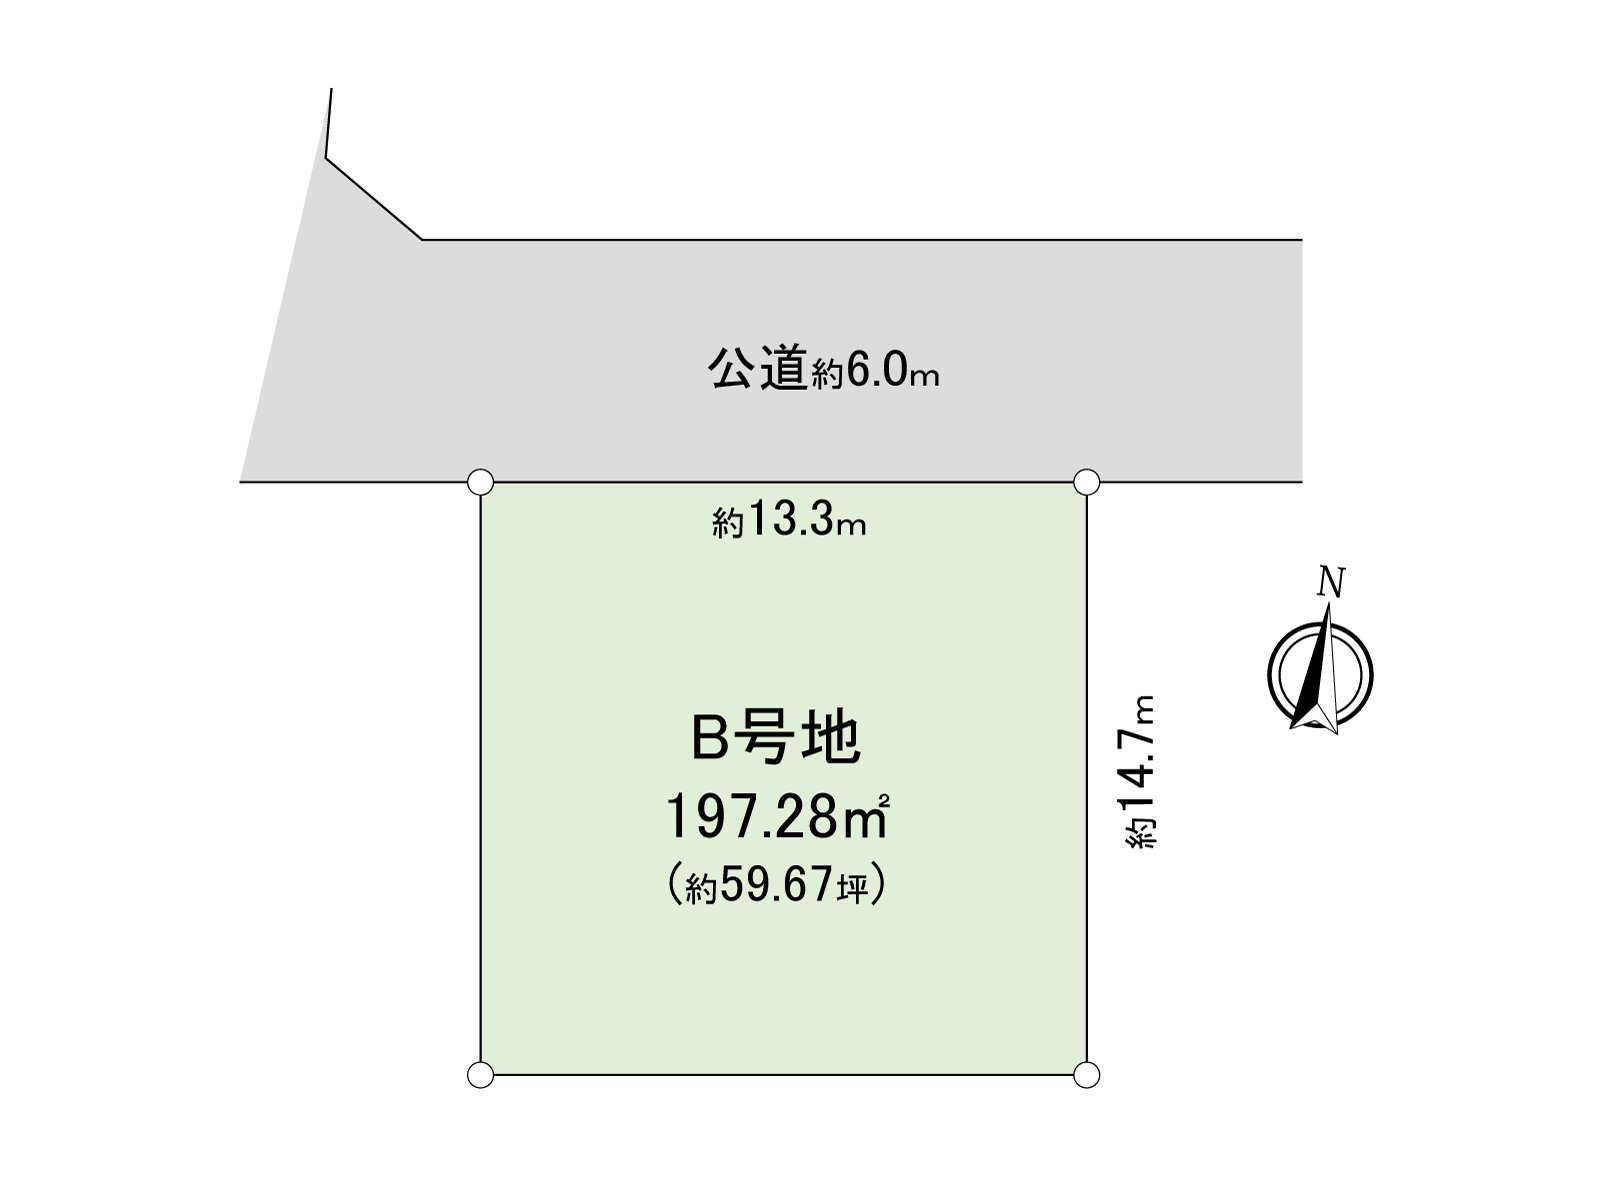 North side public road 6m, Land area about 59 tsubo